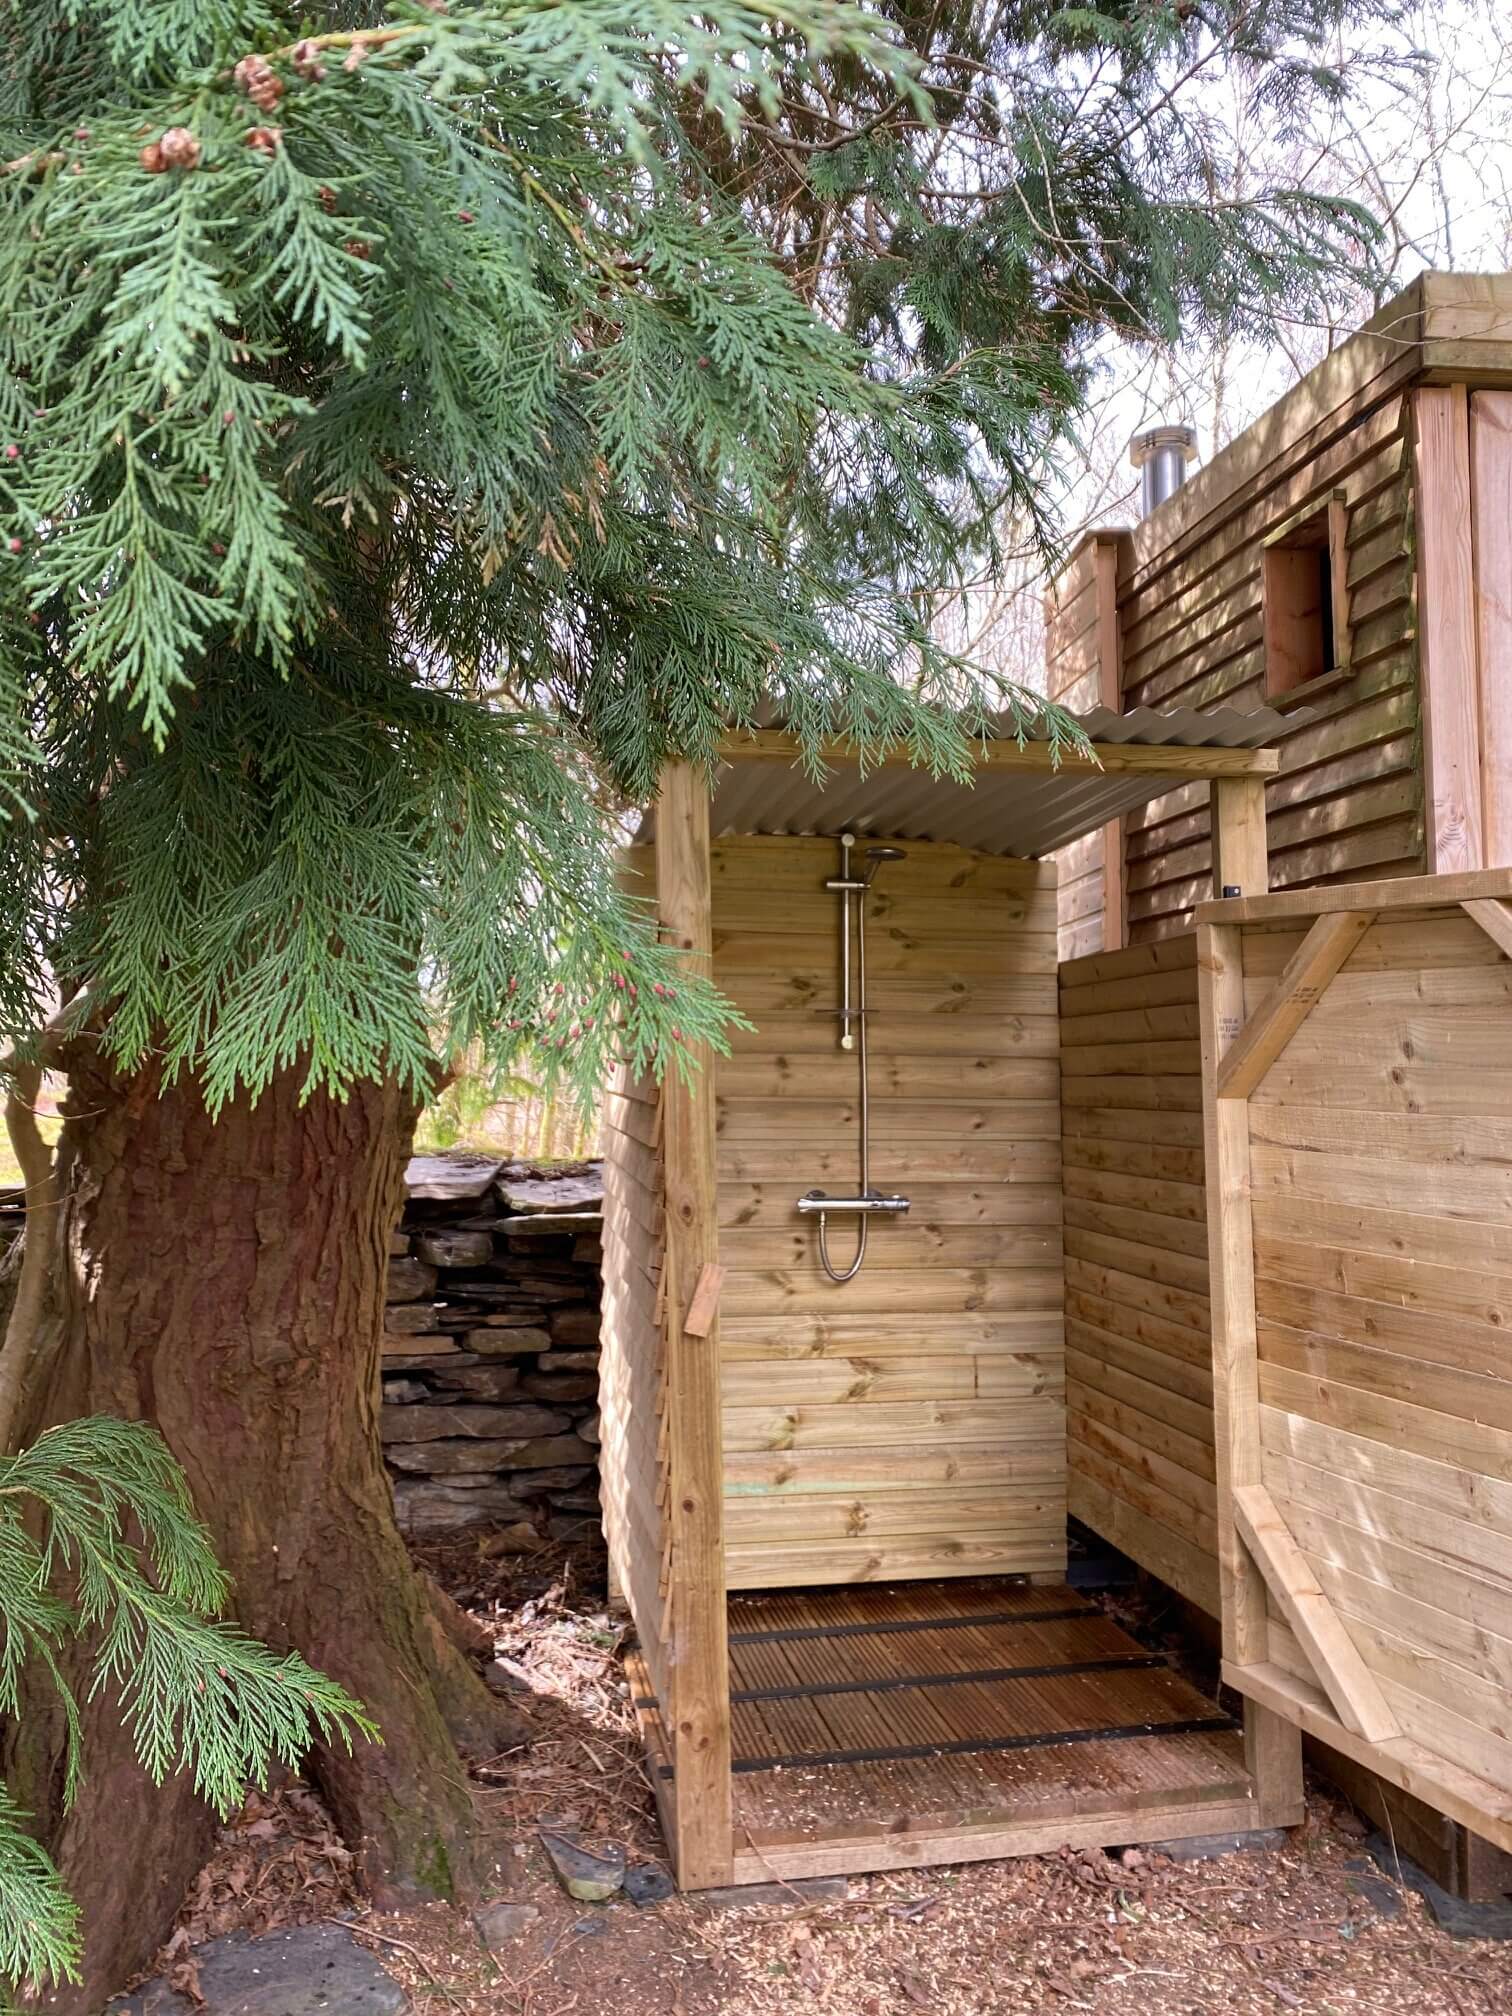 Outdoor shower, Snowdonia glamping